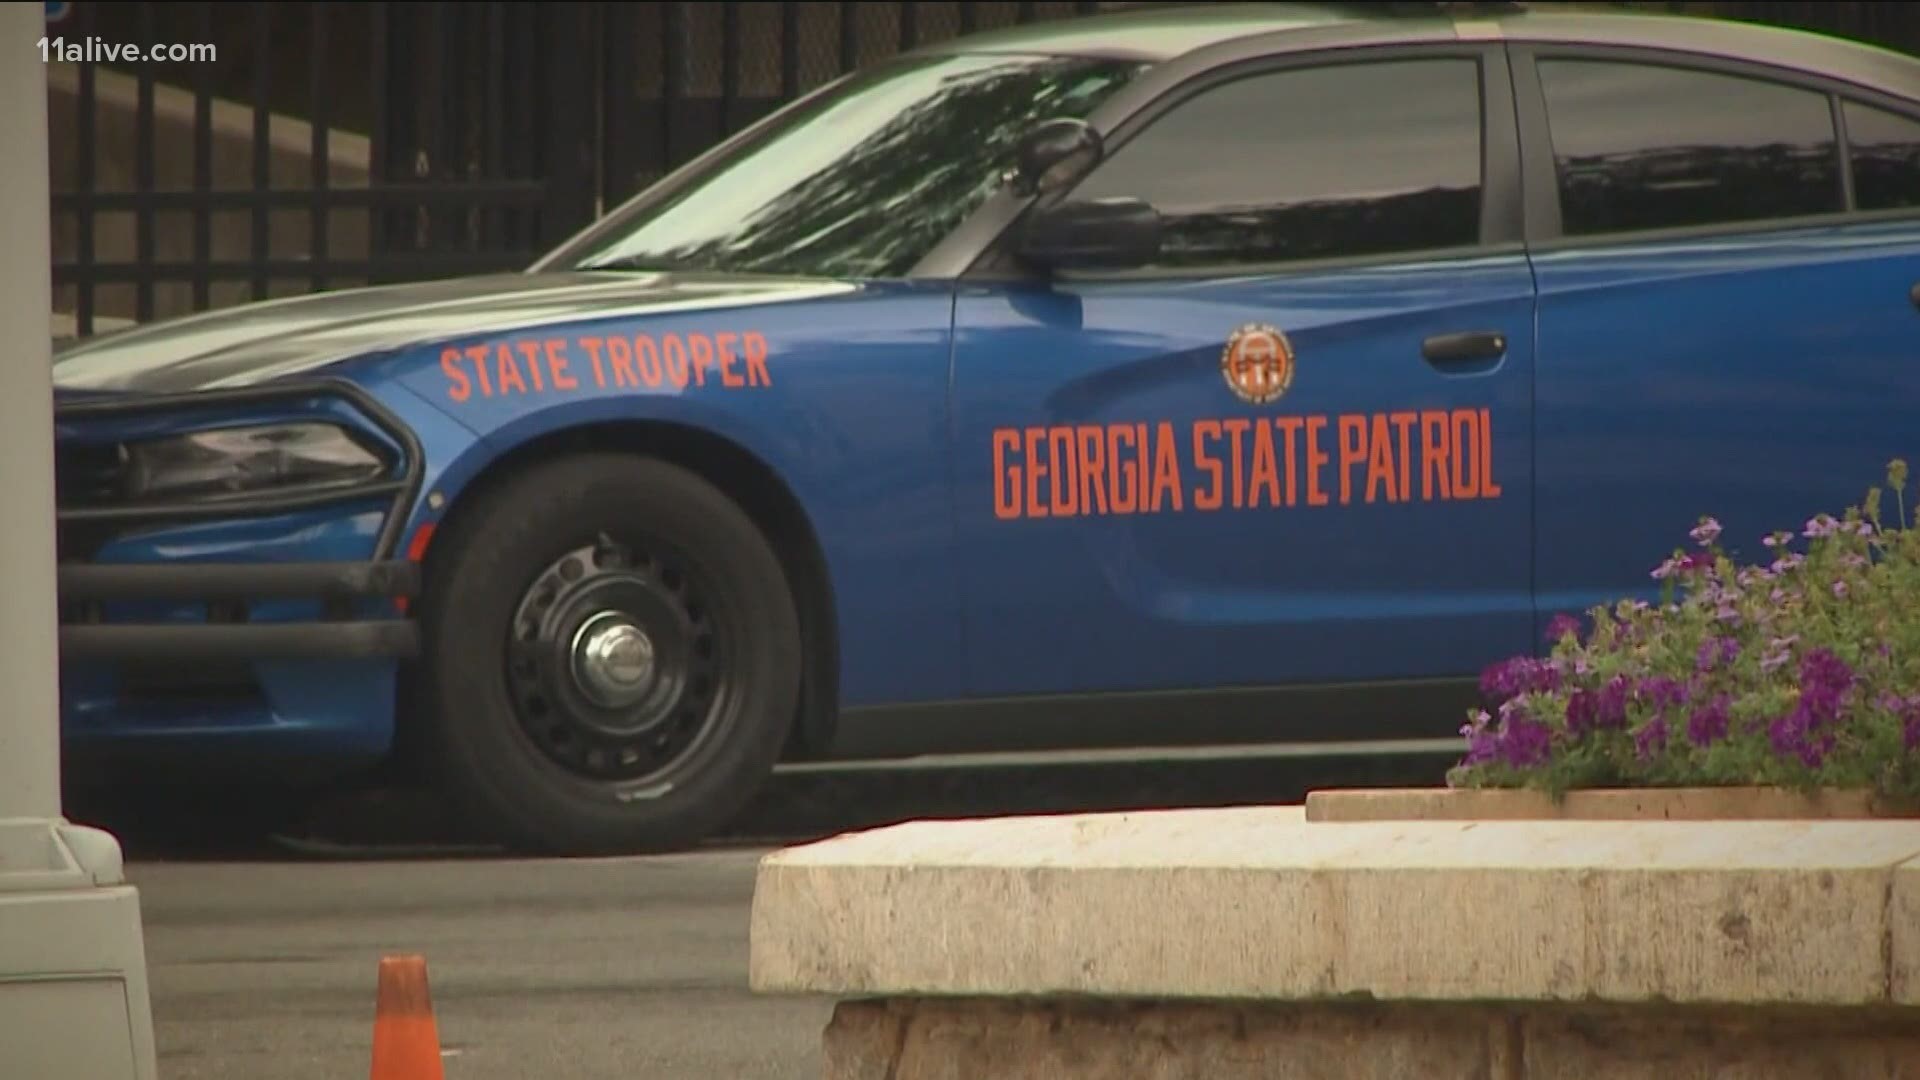 In February 2020, nearly the entire 106th Georgia State Patrol trooper class was fired in connection to the alleged cheating. Most were later cleared.